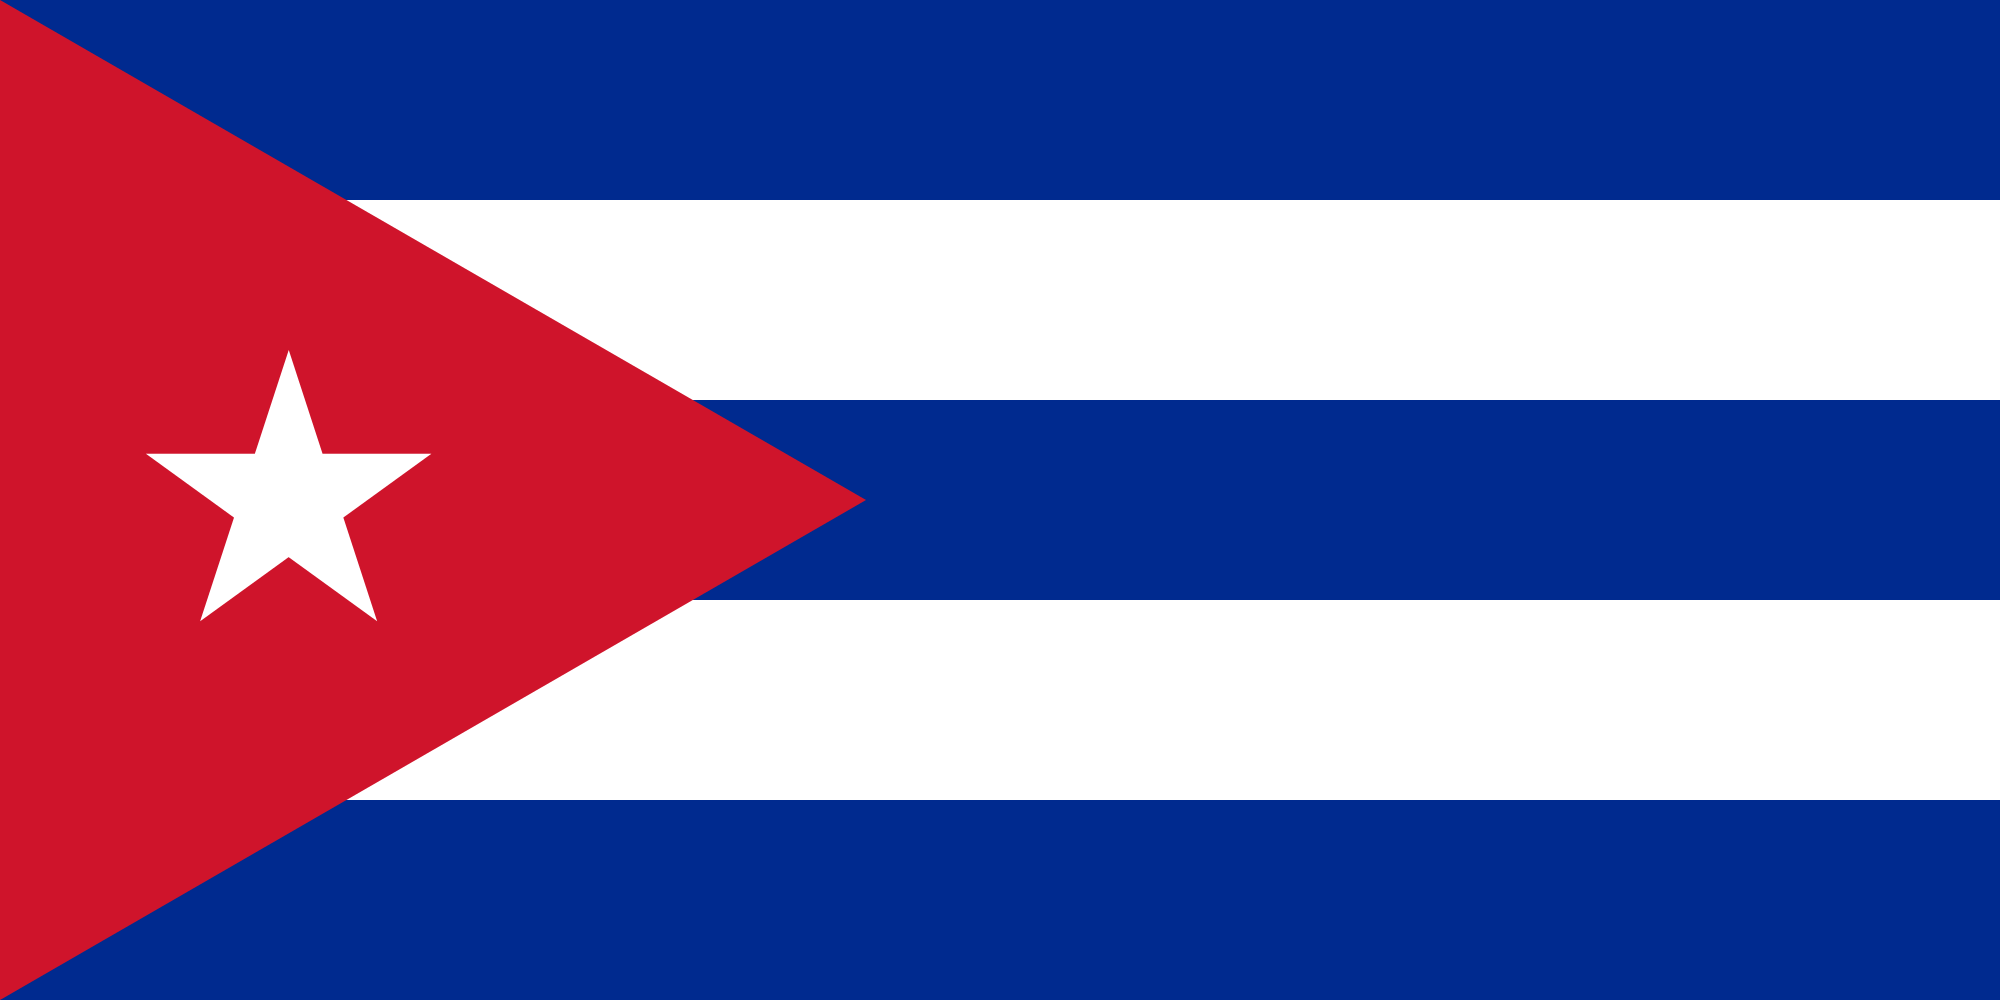 White Stripe with Red Triangle Logo - Flag of Cuba